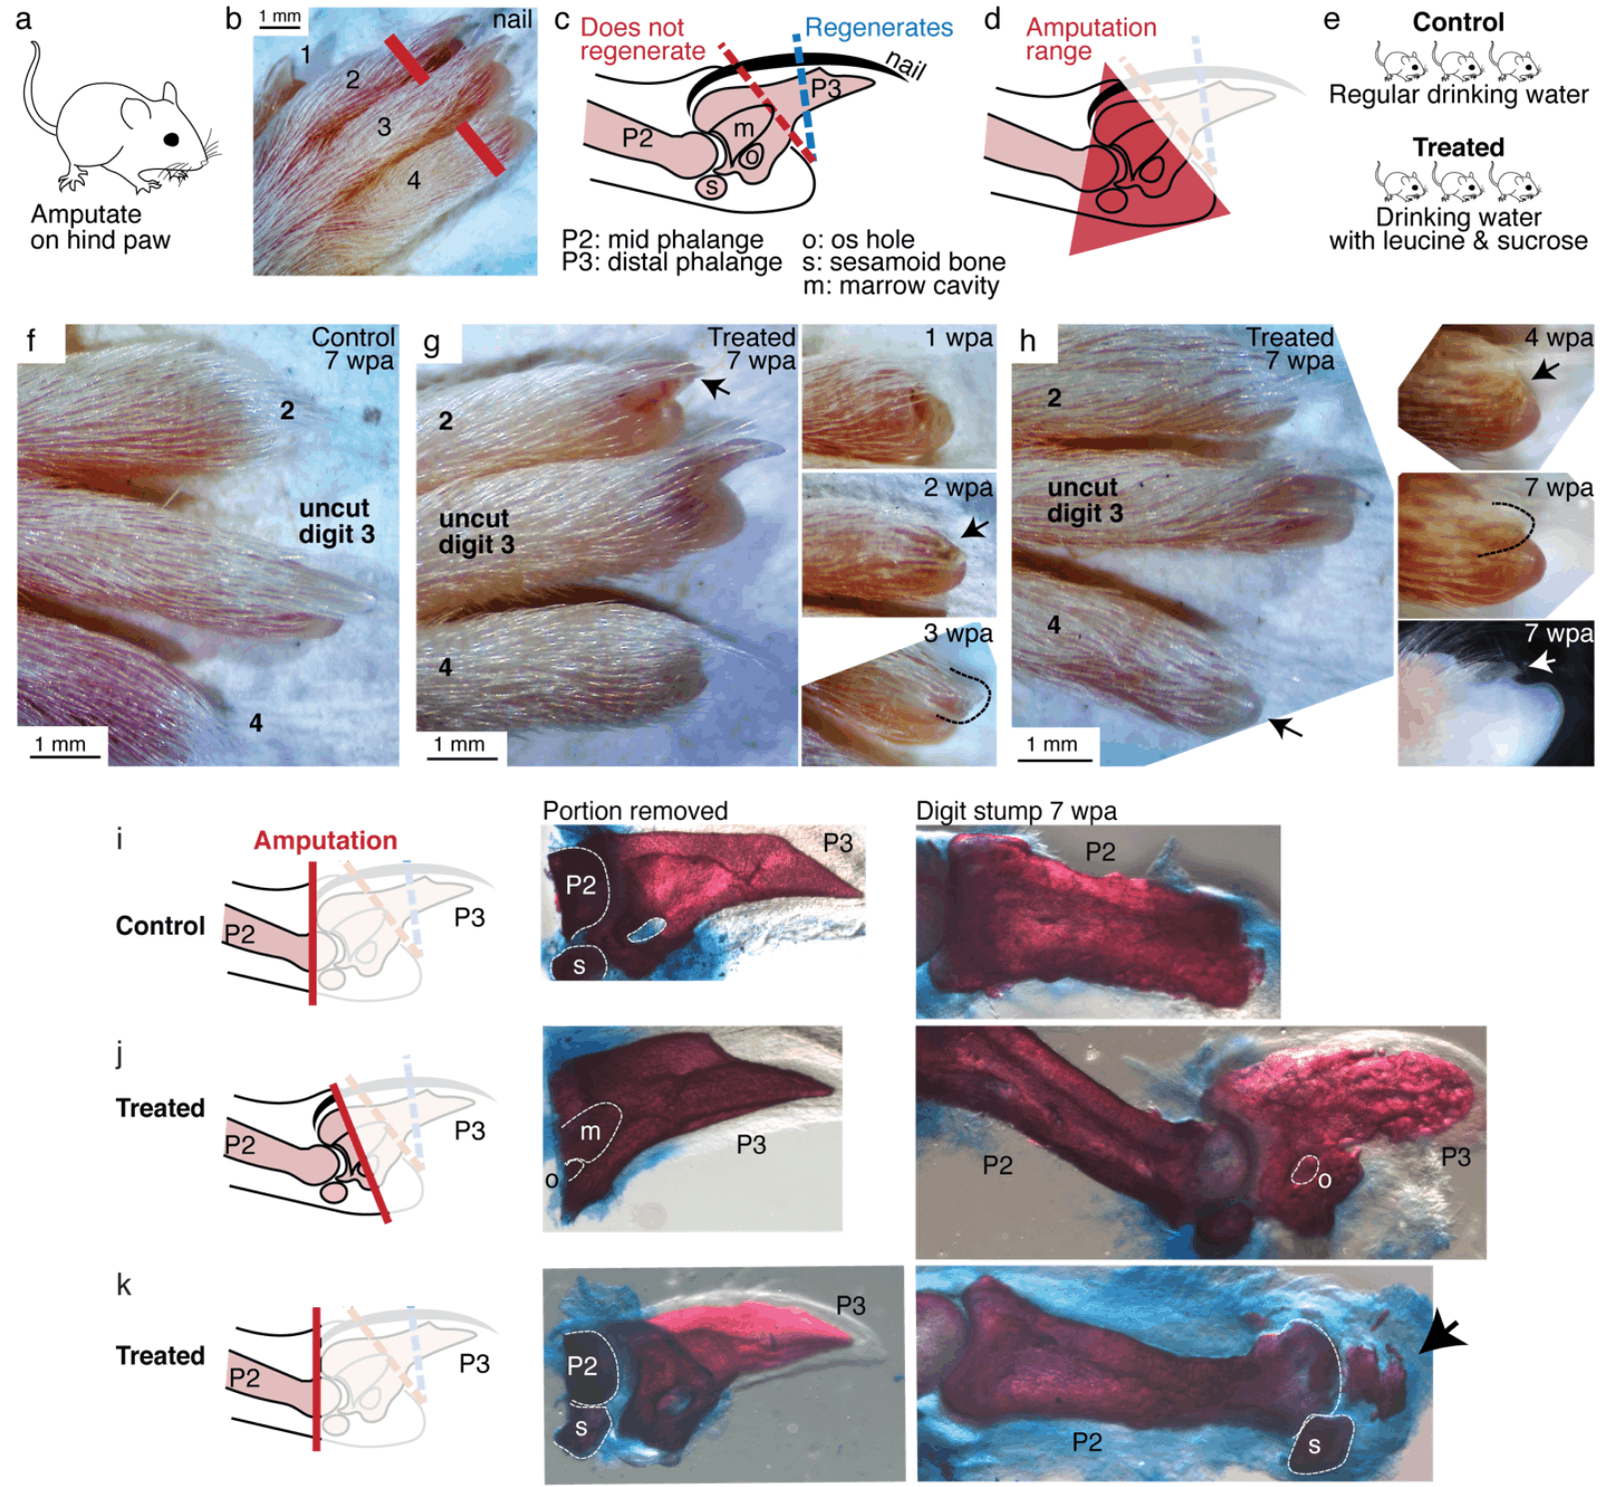 Figure 6: Leucine and sucrose induced regeneration in adult mouse digit. (a–b) Amputation was performed on hindpaws of adult (3–6 month old) mice, on digits 2 and 4, proximal to the nail. (c) Schematic of the distal phalange (P3) and middle phalange (P2). Amputations that remove <30% of P3 (blue line) regenerate, whereas amputations that remove >60% of P3 (red line) do not regenerate. Amputations in the intermediate region can occasionally show partial regenerative response. (d) Amputations in this study were performed within the red-shaded triangle. (e) Amputated mice were given regular drinking water (control) or drinking water supplemented with 1.5% L-leucine, 1.5% L-glutamine, and 4–10 w/​​v% sucrose (2 exps with 4%, 6 exps with 10%). Drinking water, control and treated, was refreshed weekly. (f) A representative paw from the control group. The amputated digits 2 and 4 simply healed the wound and did not regrow the distal phalange. (g) In this treated mouse, digit 2 (arrow) regrew the distal phalange and nail. Insets on the right show the digit at earlier time points. At week 1, the amputation site still appeared inflamed. At week 3, the beginning of the nail appears (arrow). At week 3, a clear nail plate was observed.